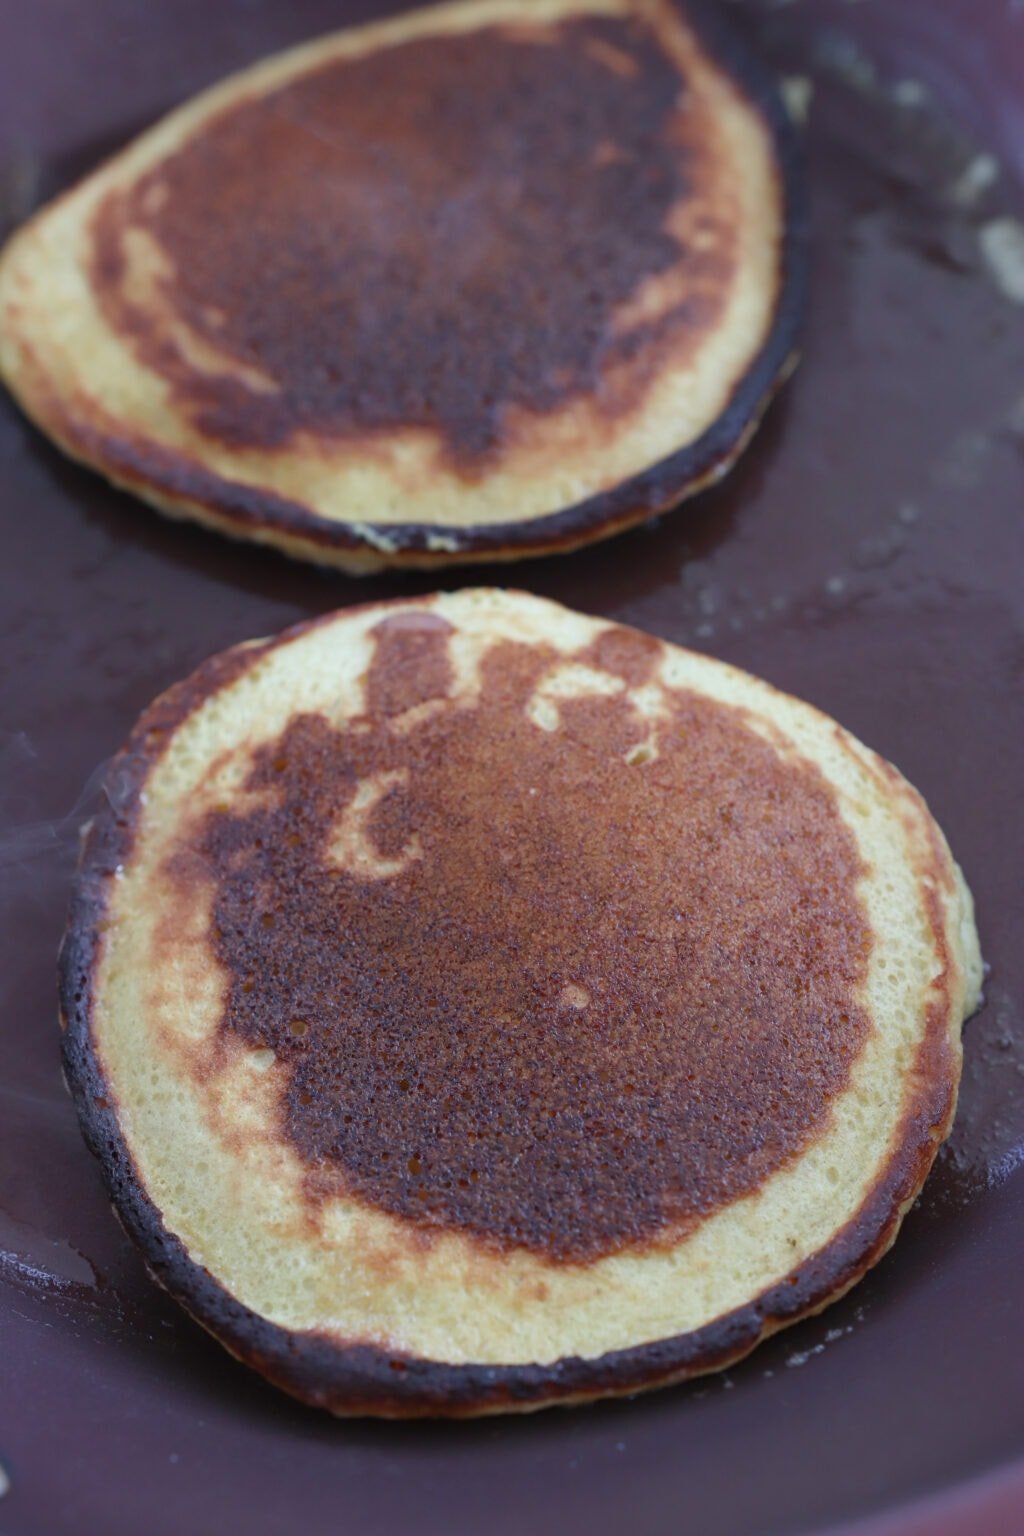 Two cooked golden brown pancakes in a frying pan.